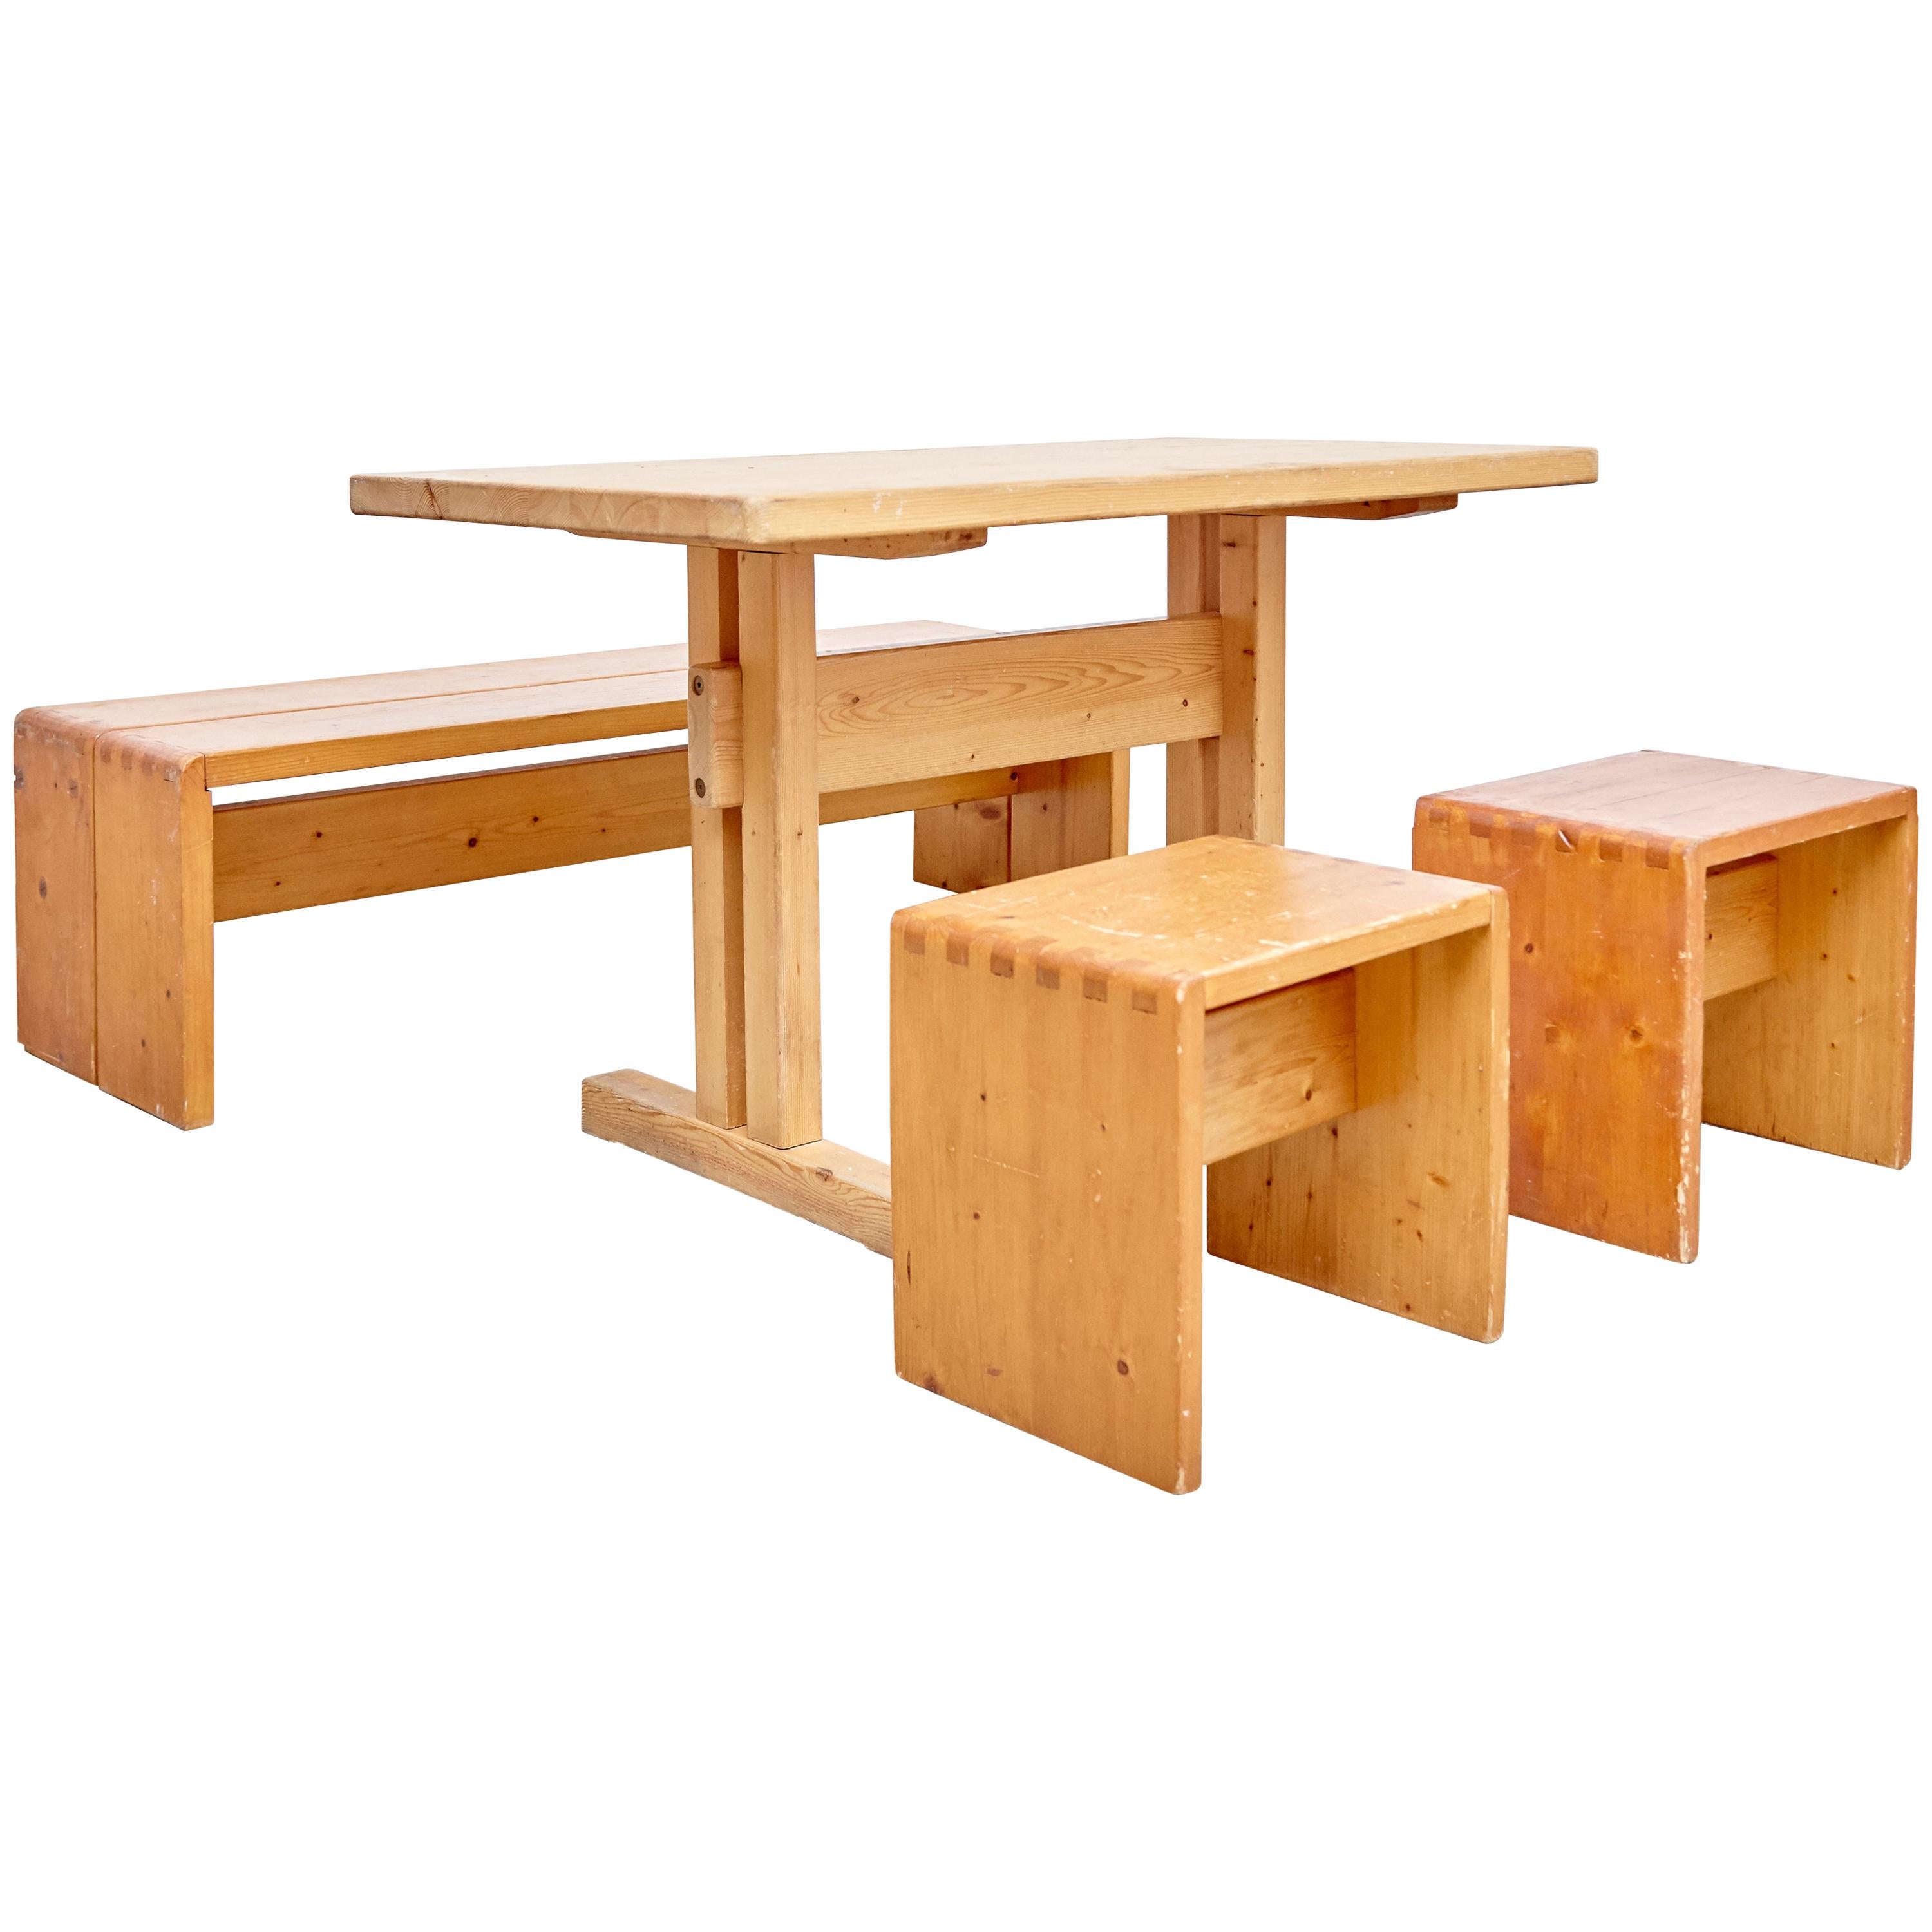 Charlotte Perriand Table, Stools and Bench for Les Arcs